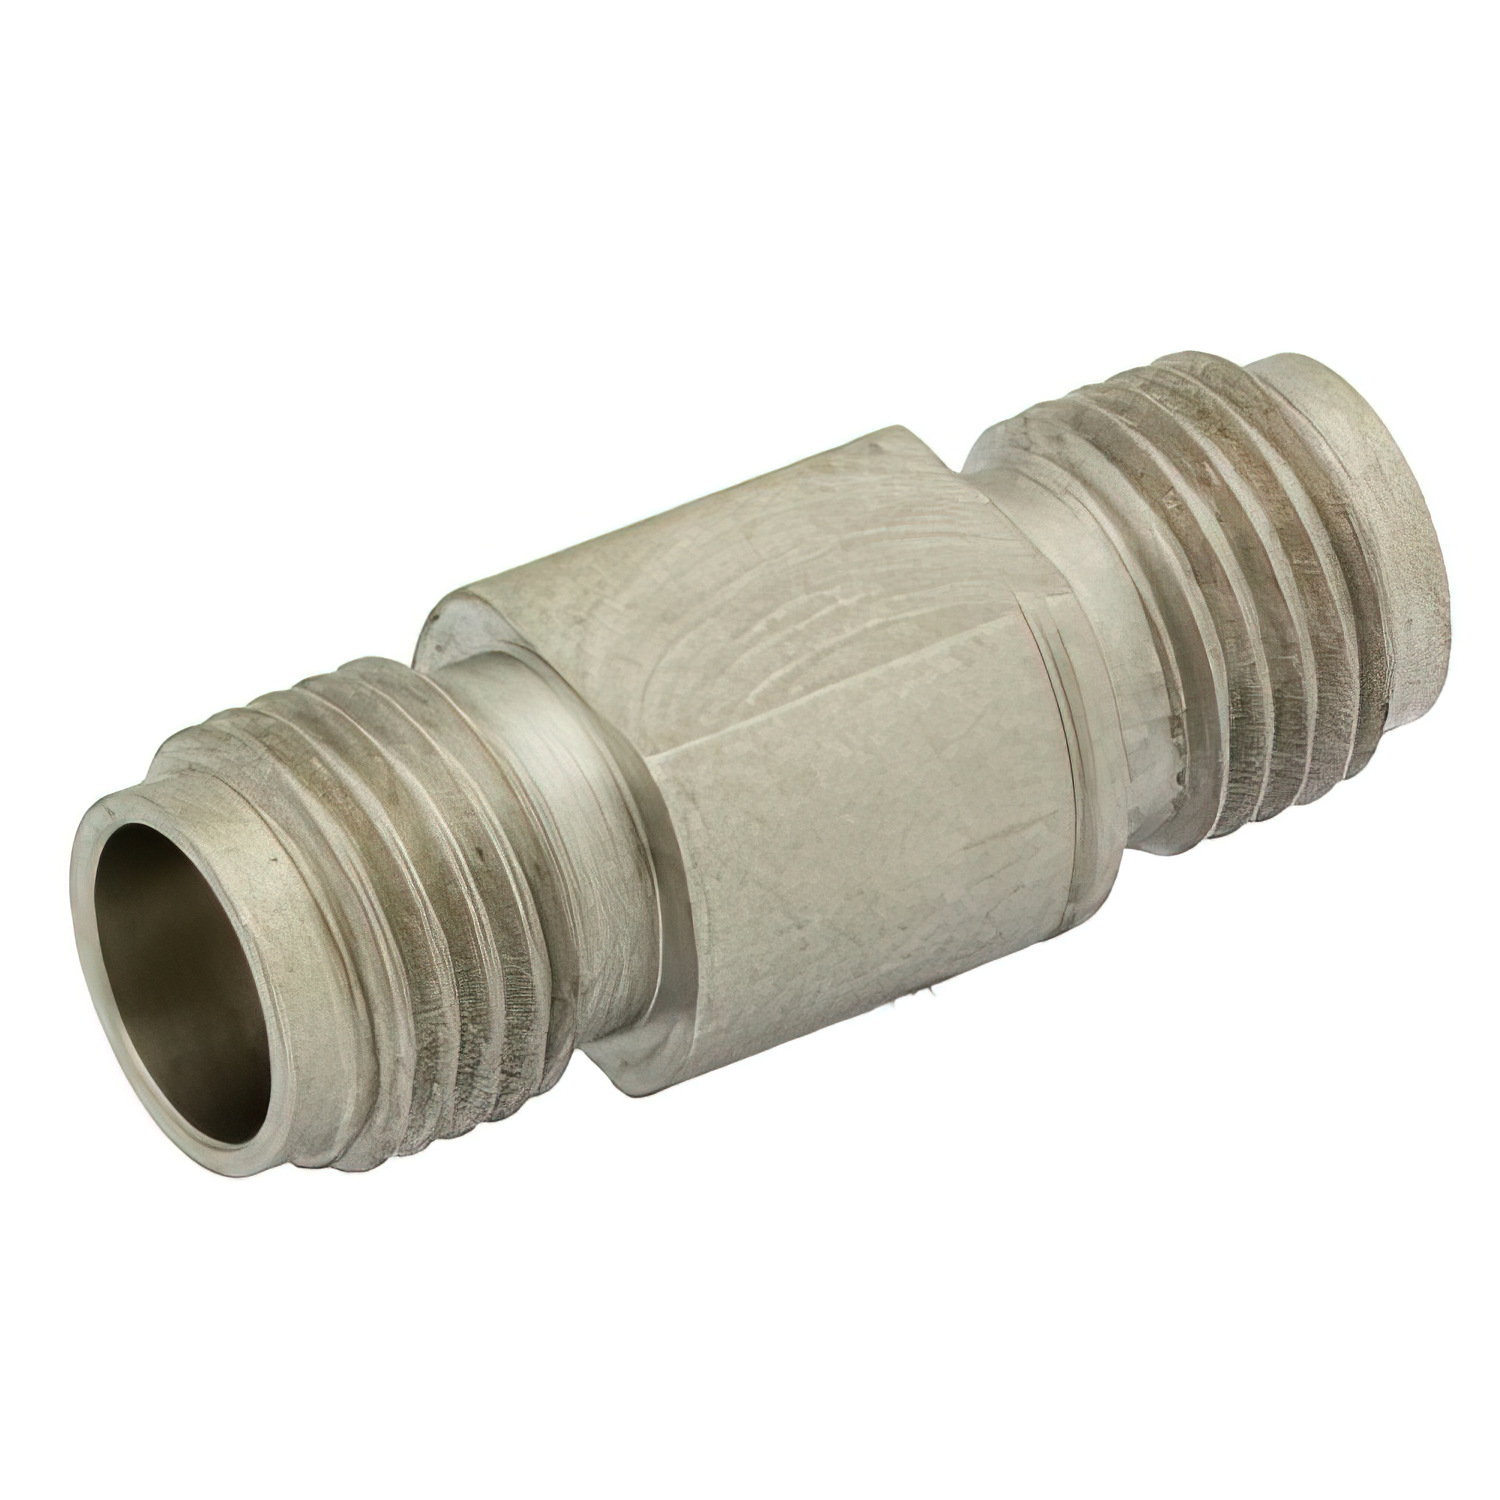 2.4mm Female to 1.85mm Female Adapter 2